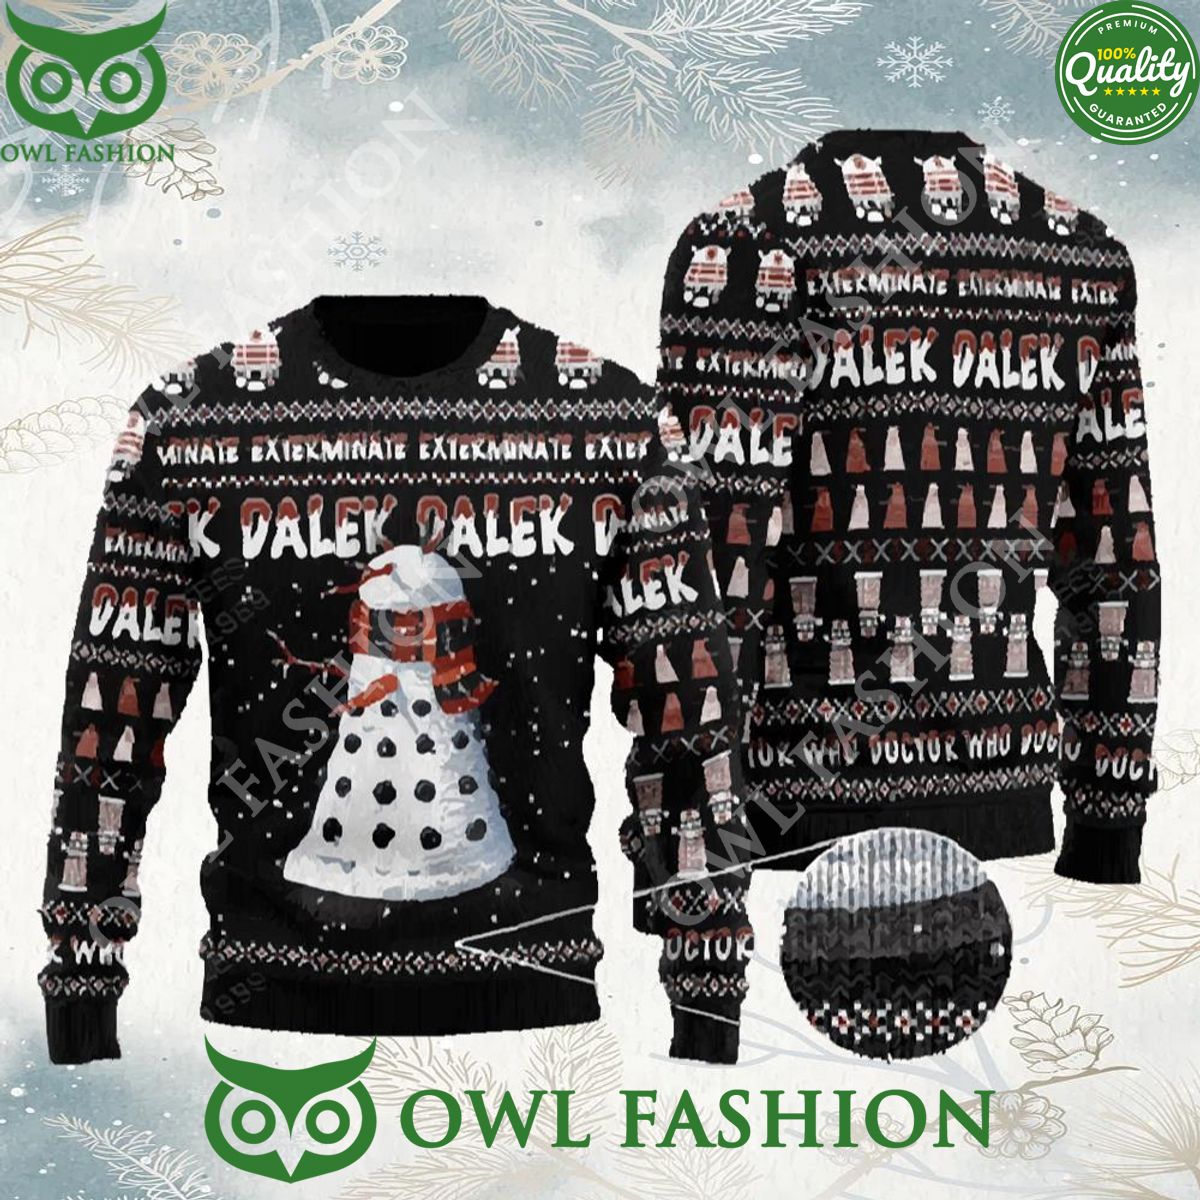 snowy dalek doctor who knitted christmas 3d sweater jumper 1 ce4gB.jpg